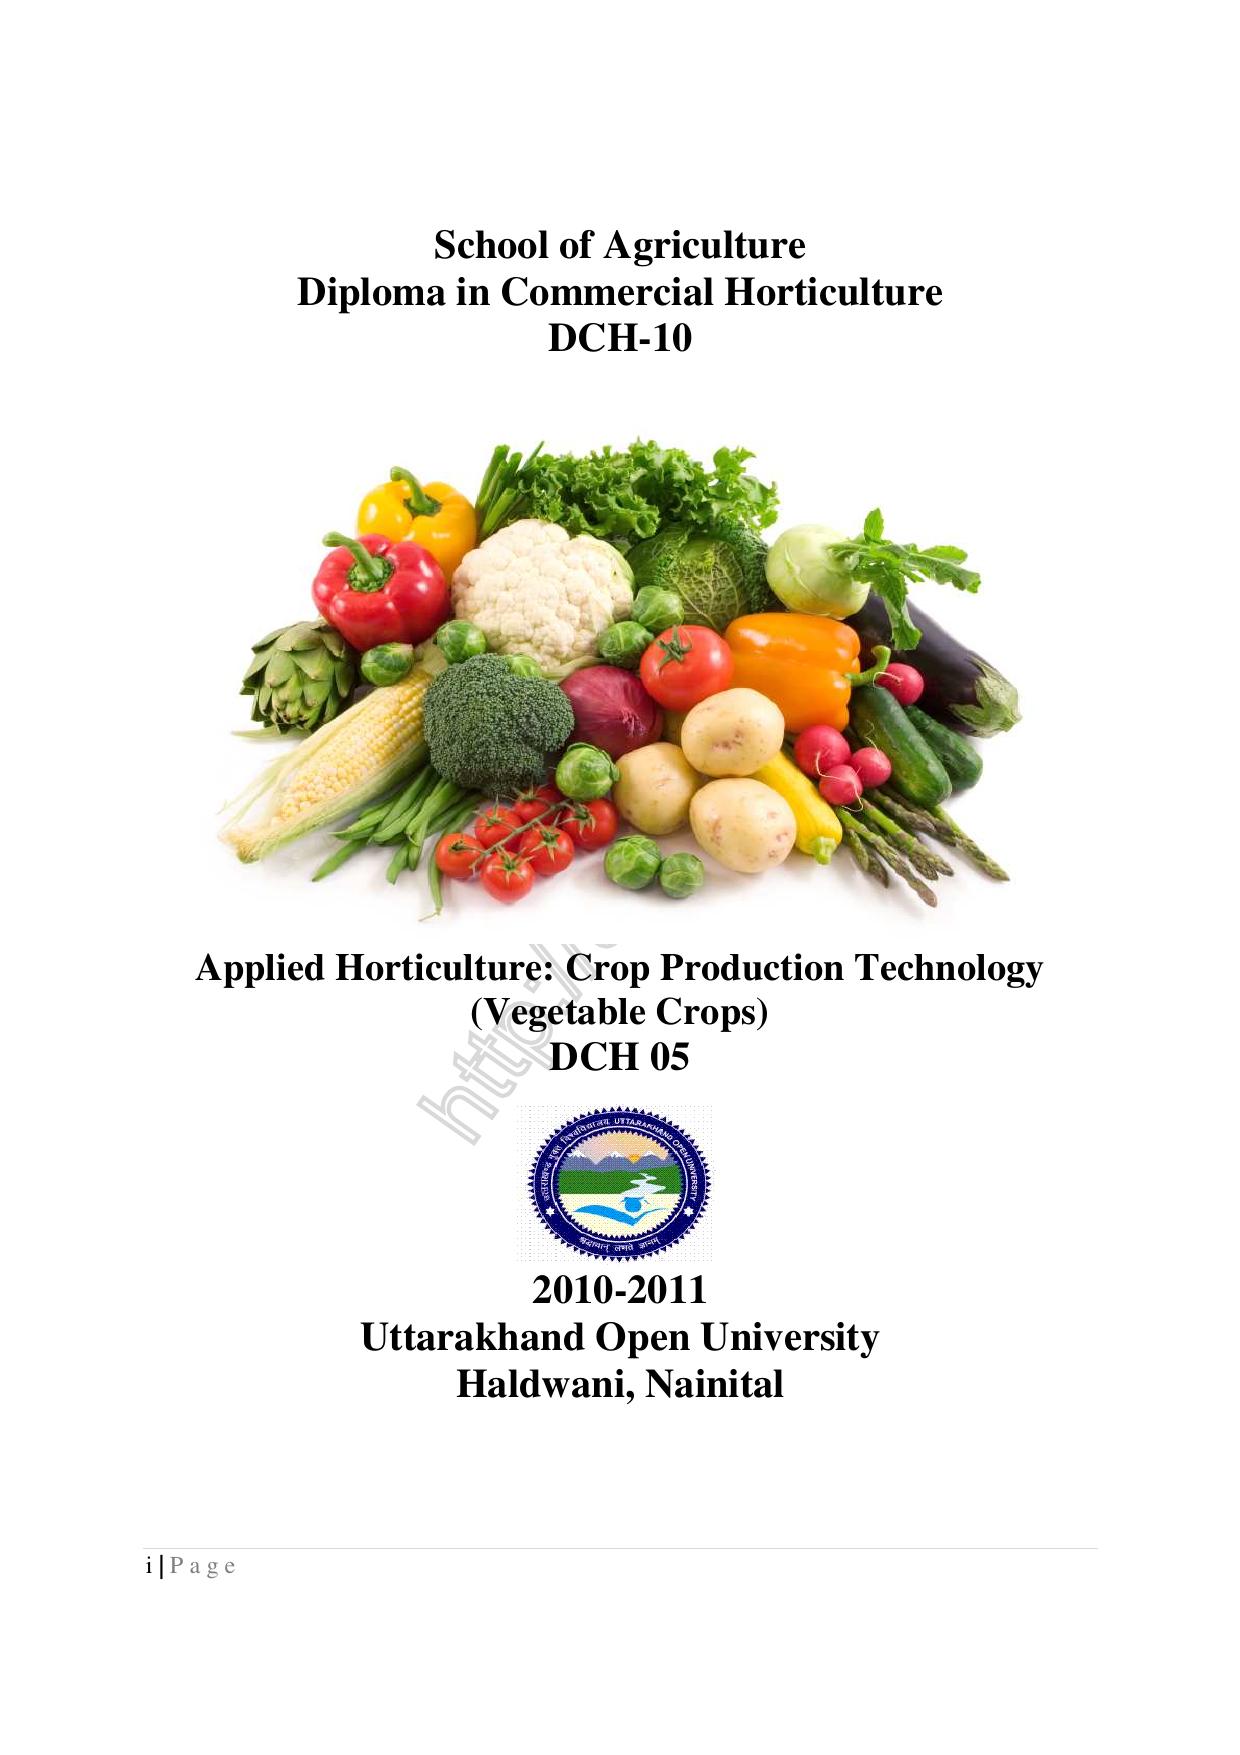 Applied Horticulture Crop Production Technology (Vegetable Crop)